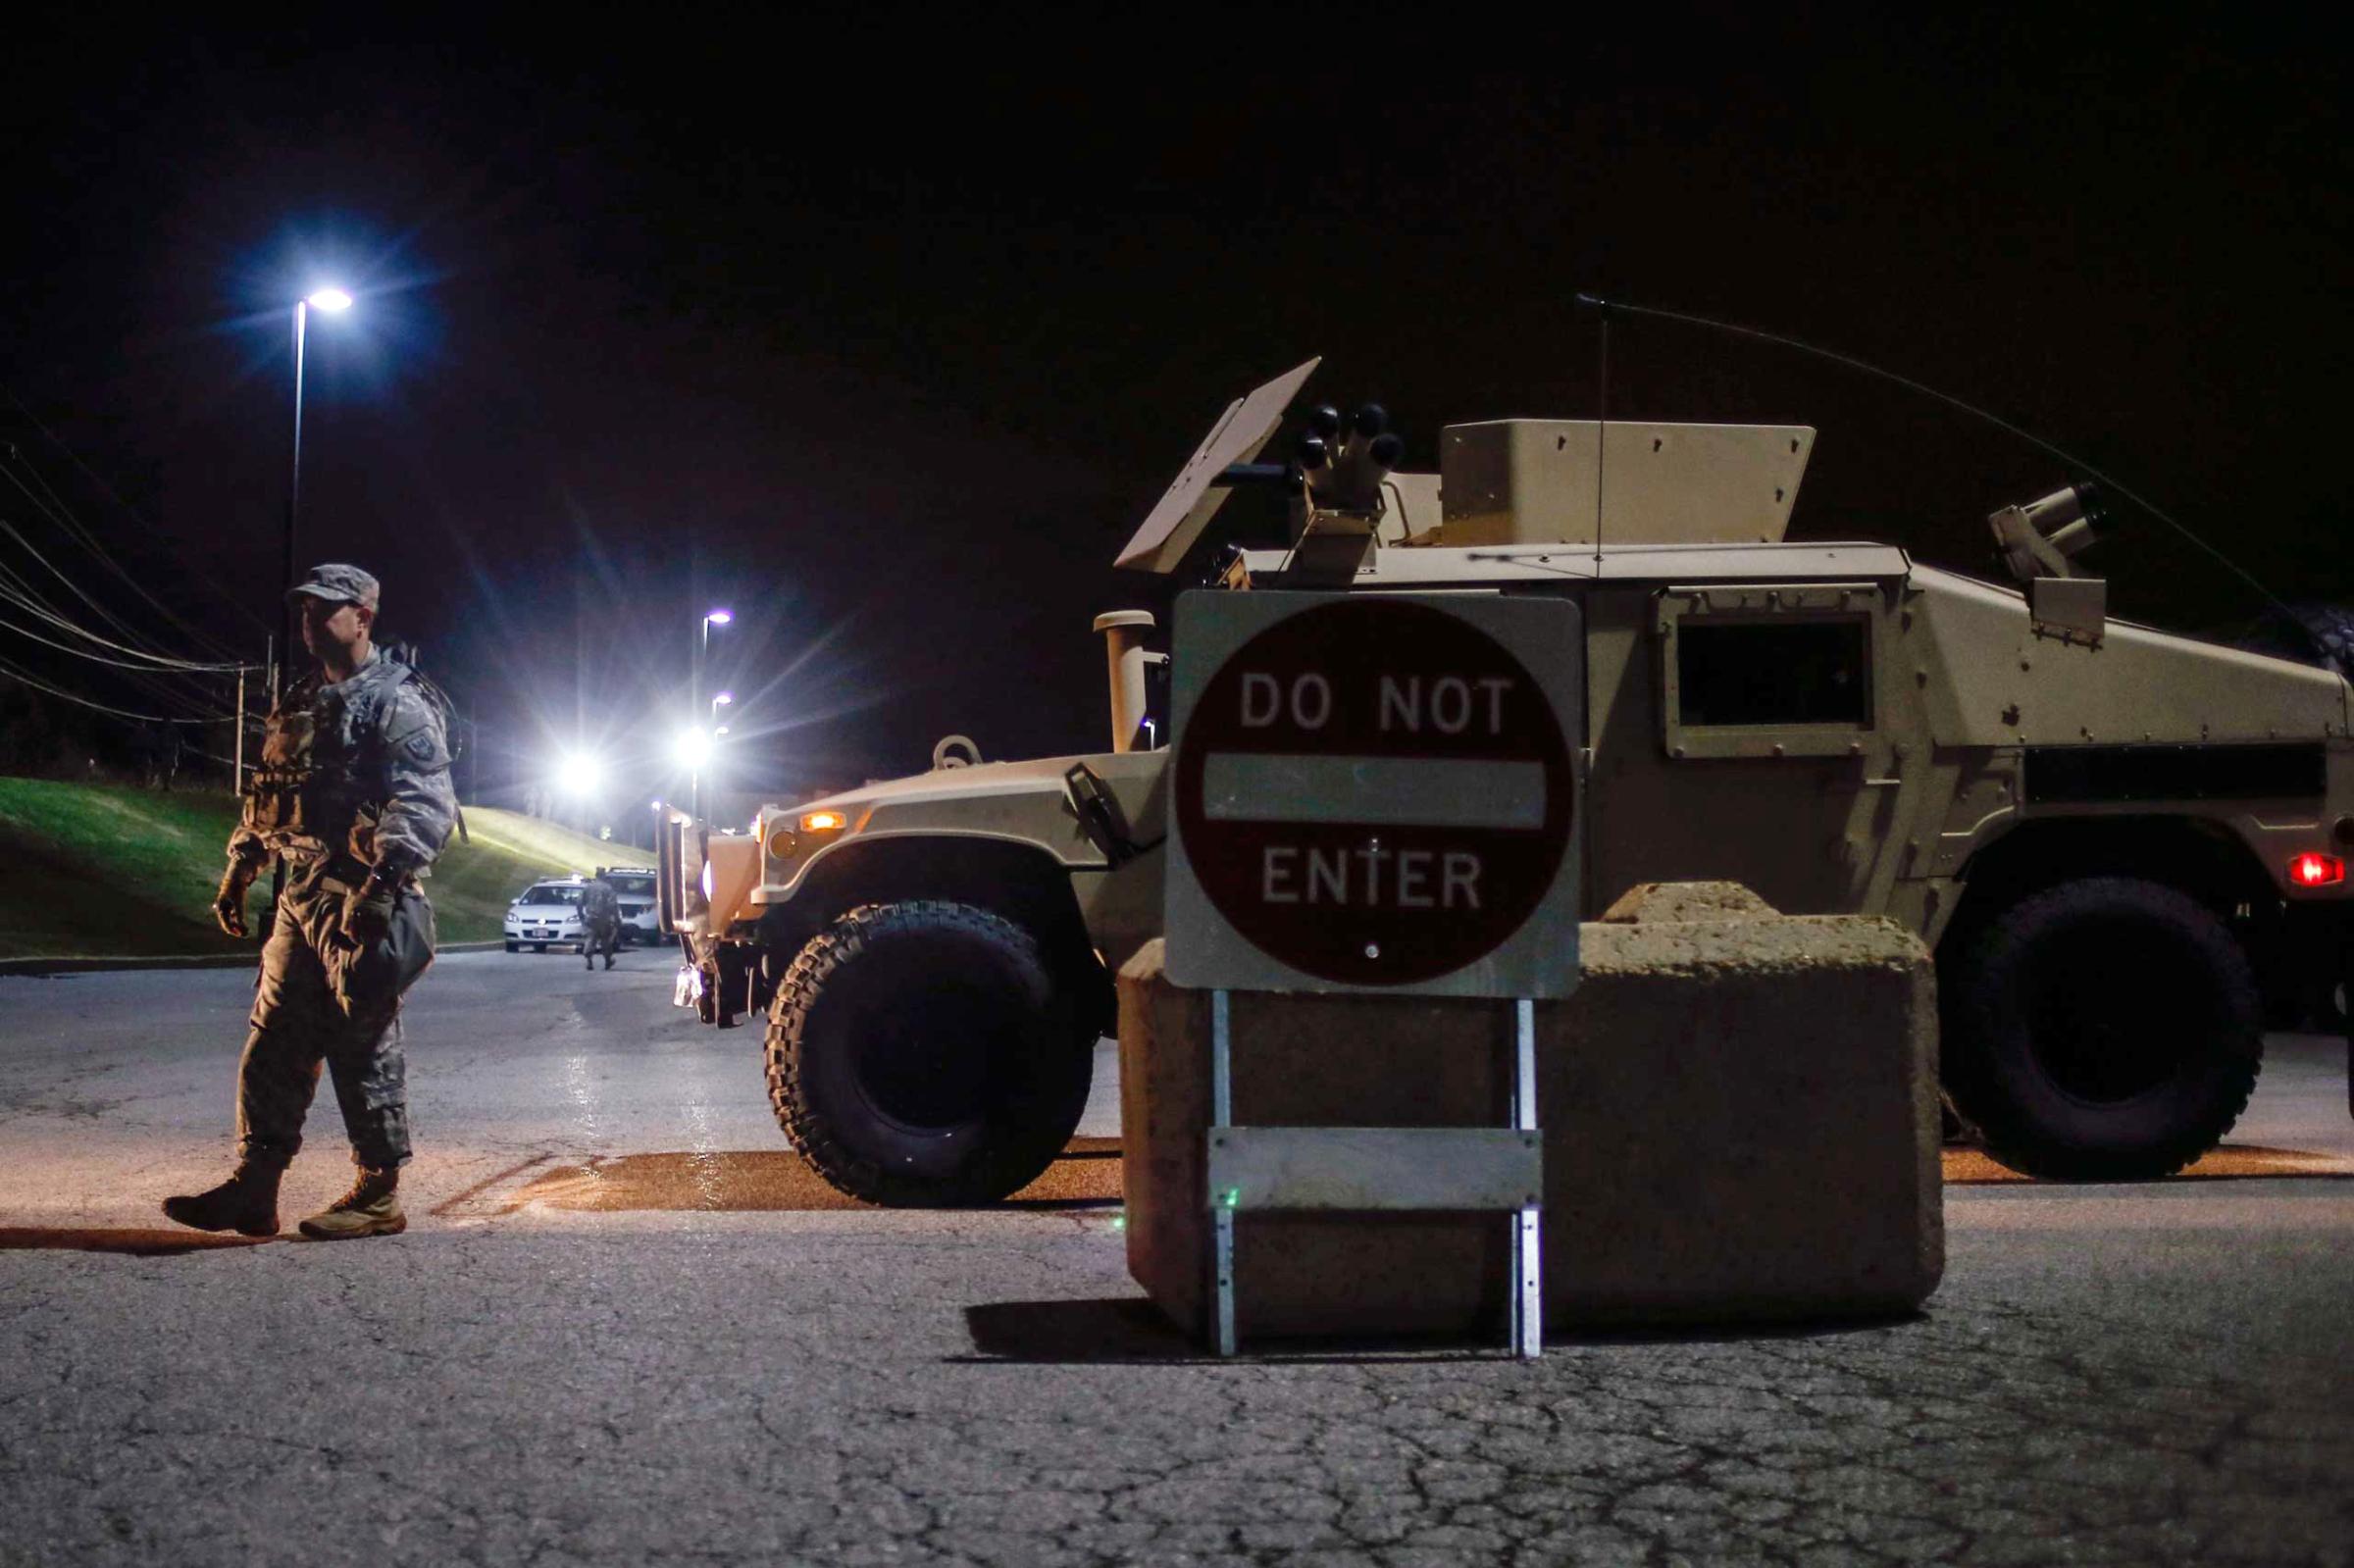 Member of the National Guard stands along a parked military vehicle in the back of a shopping center in Ferguson, Missouri